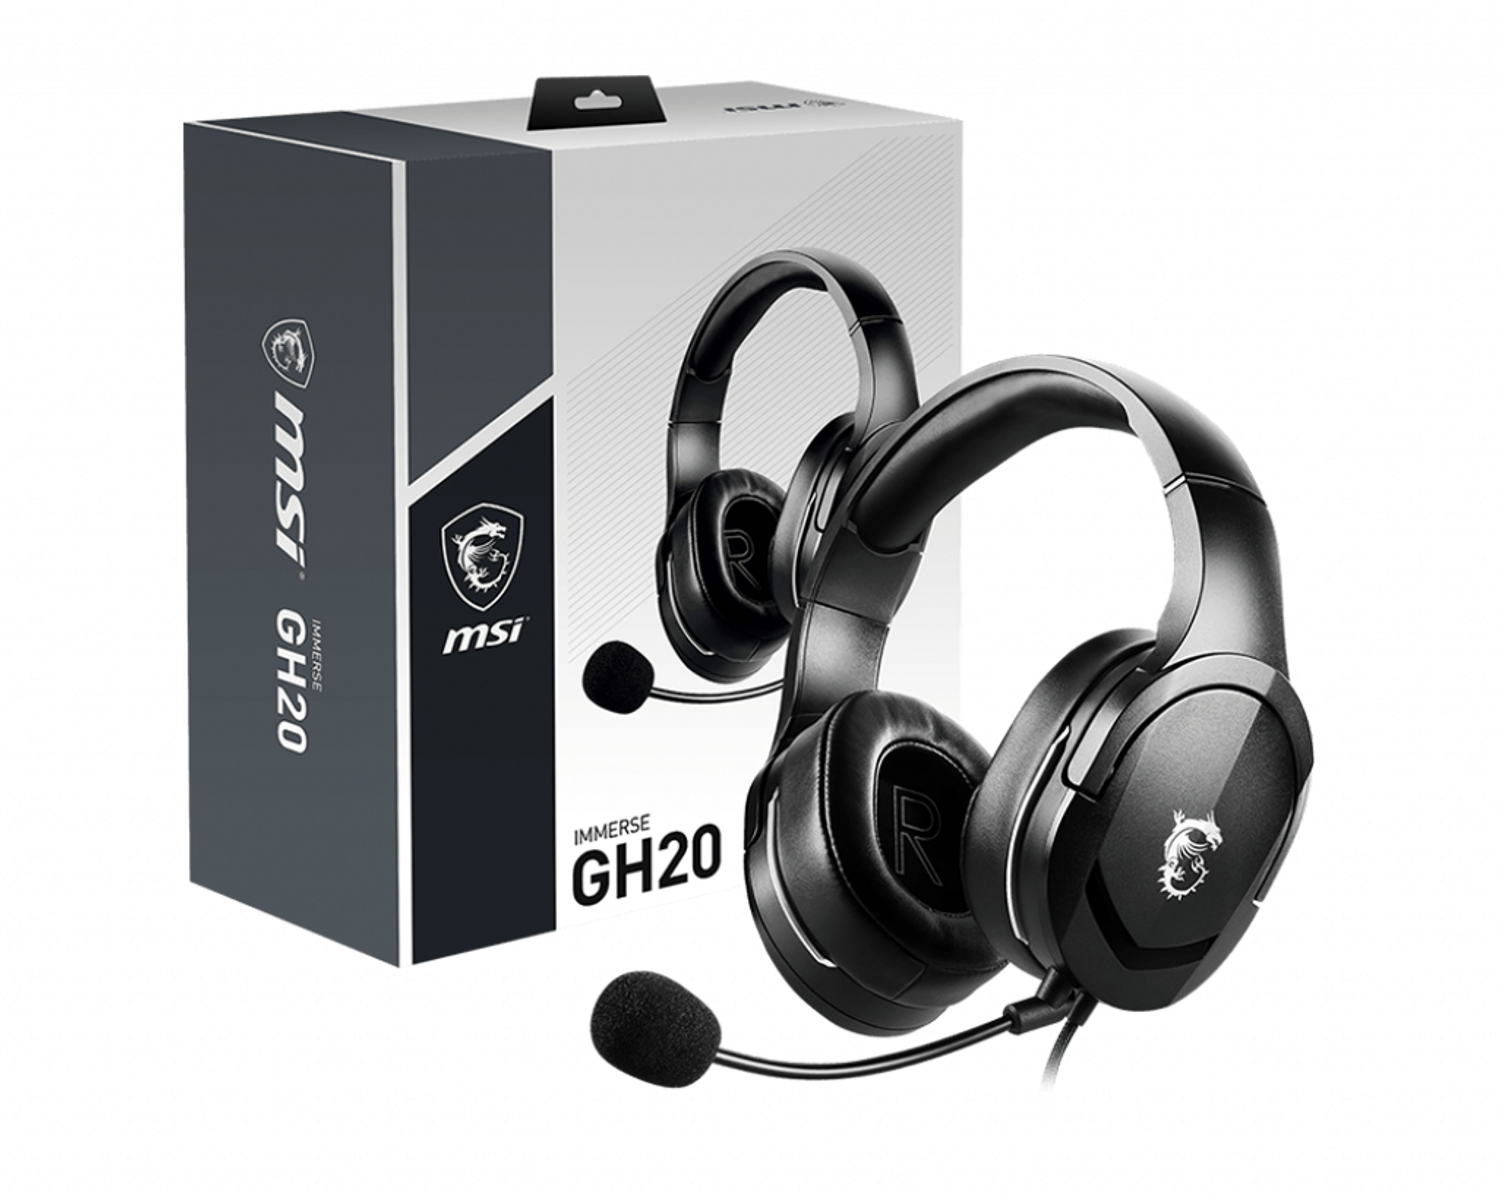 IMMERSE Gaming Headset Over-ear GH20, Schwarz S37-2101030-SV1 MSI